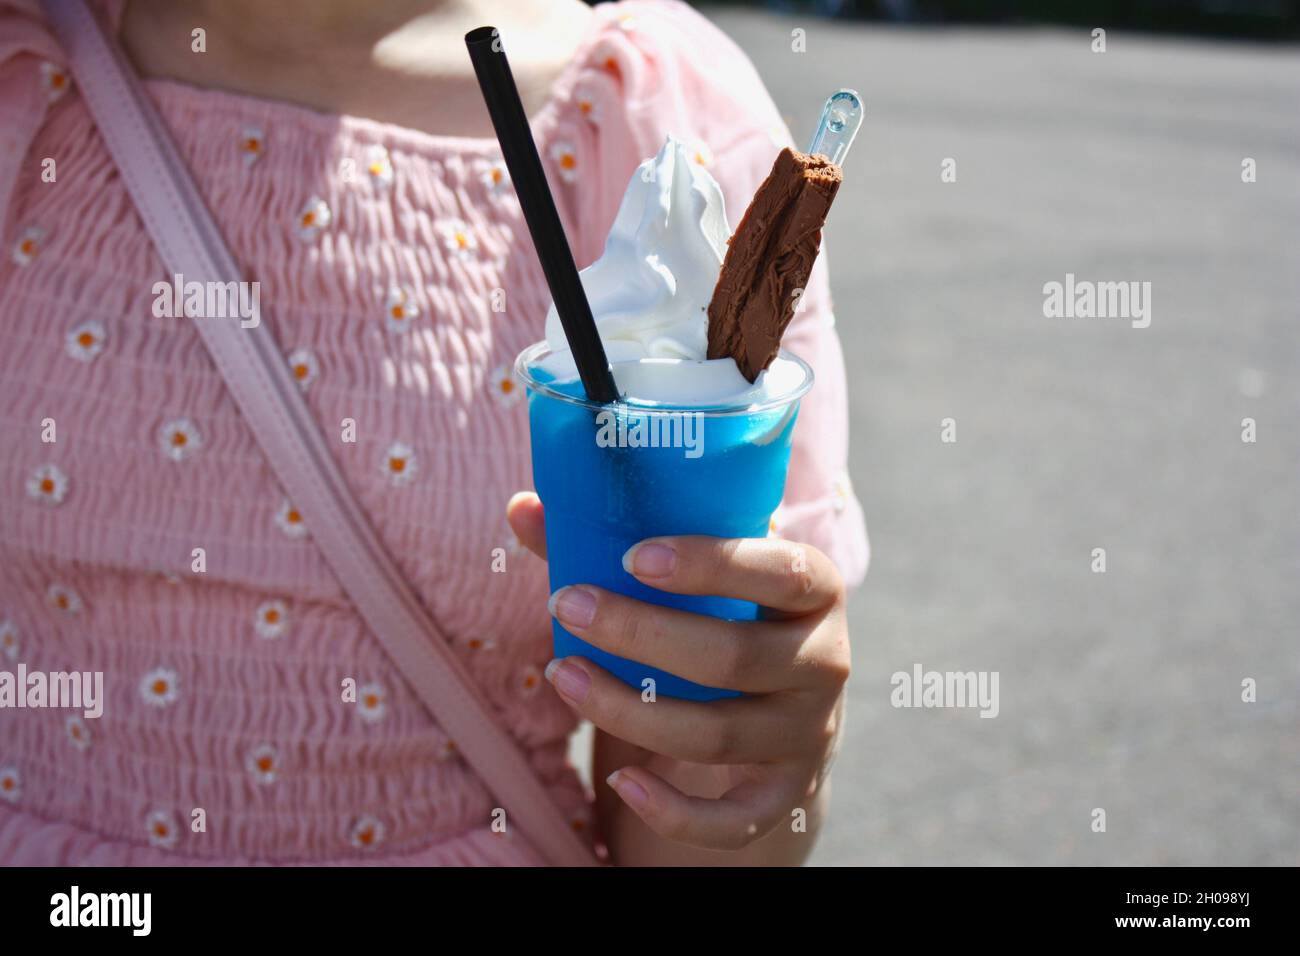 Young teen girl in a pink floral dress holds a blue slush with soft serve ice cream atop. Stock Photo